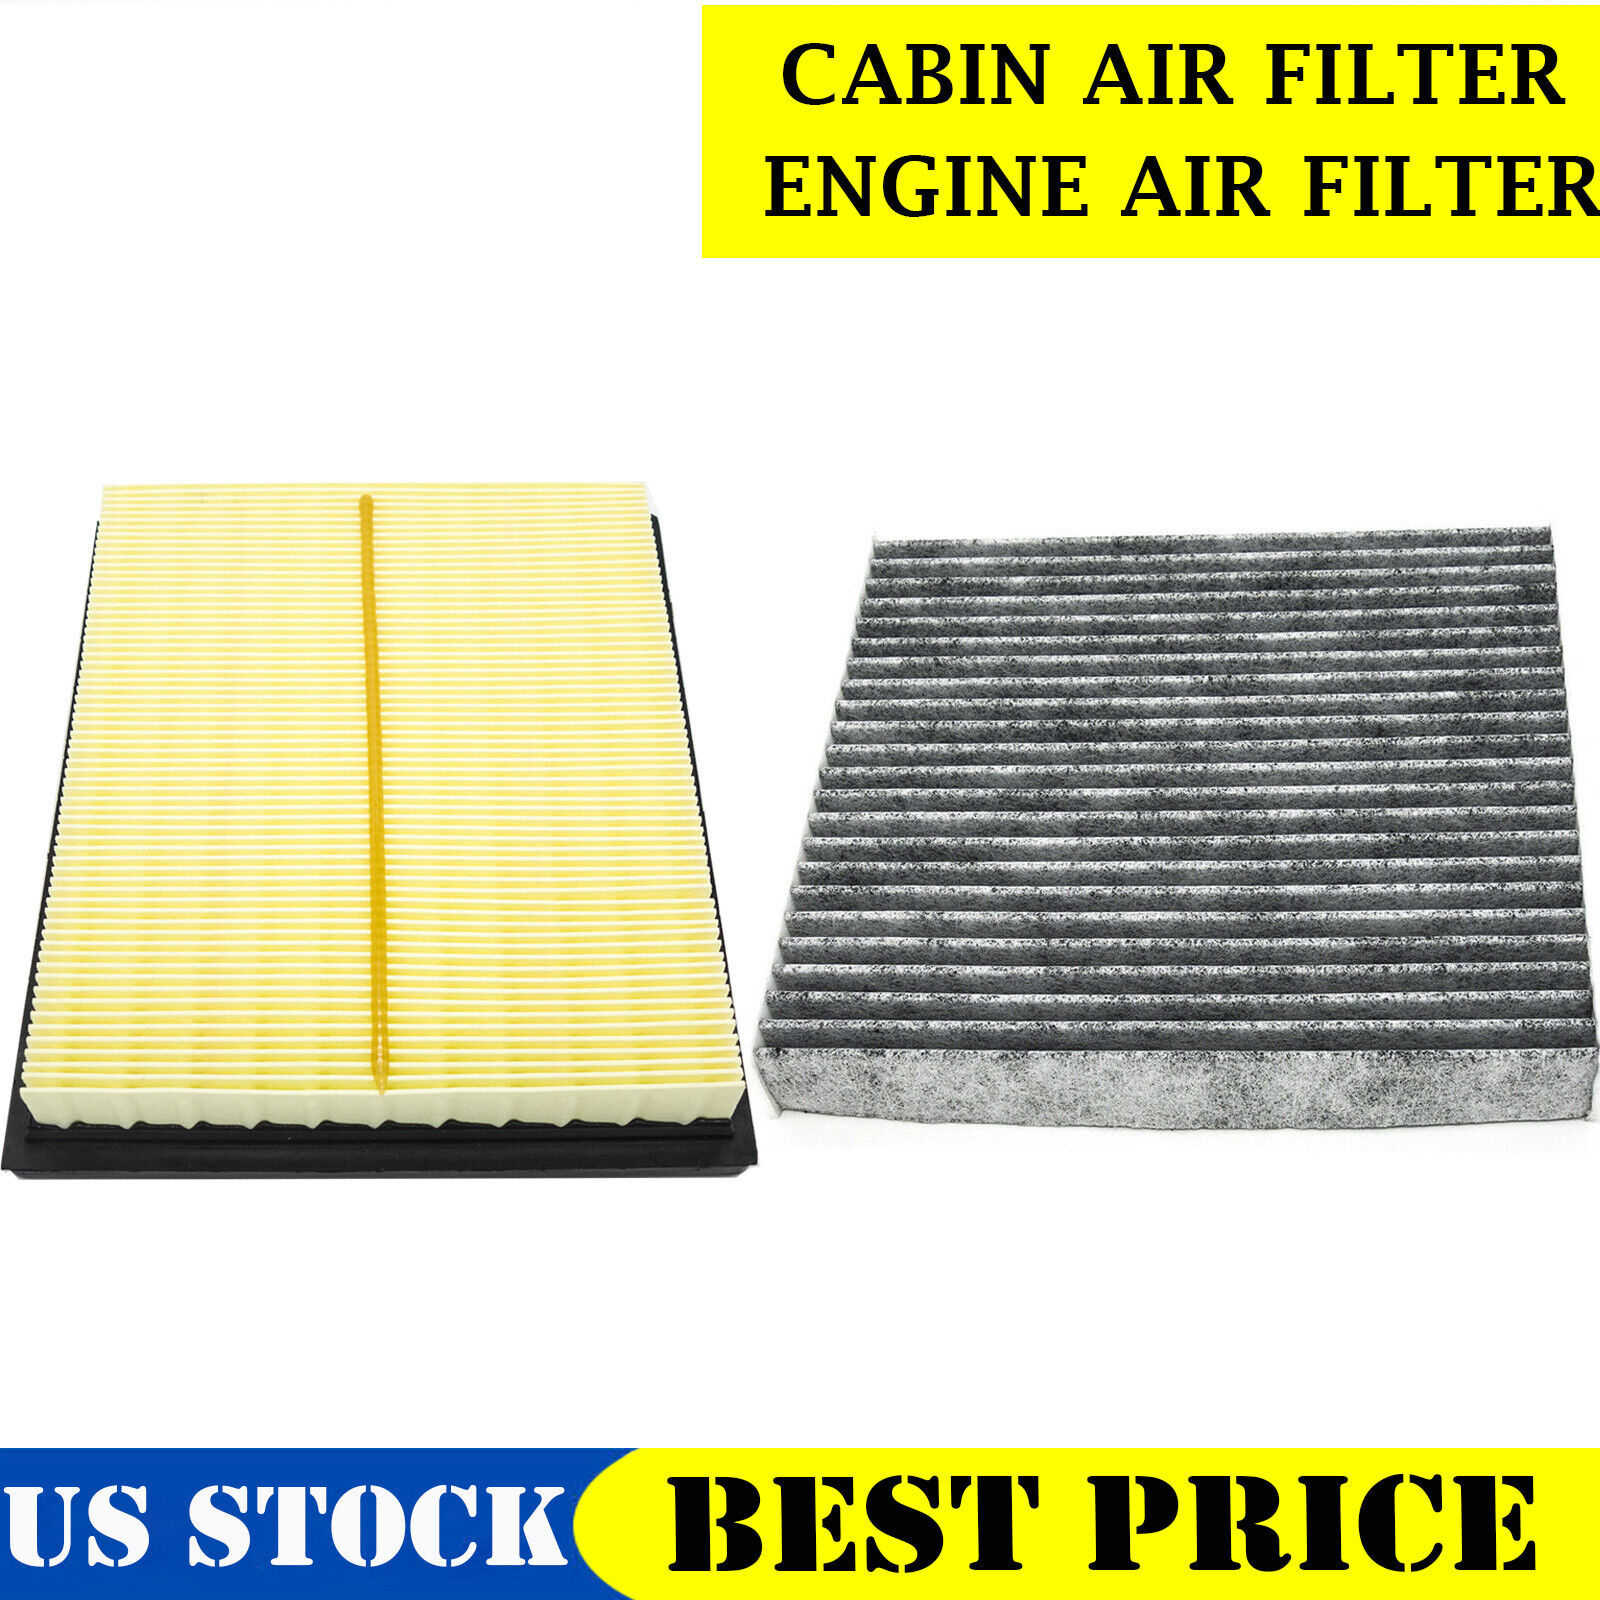 CARBON CABIN & ENGINE AIR FILTER KIT FOR TOYOTA PRIUS 1.8L ENGINE  2015 - 2010